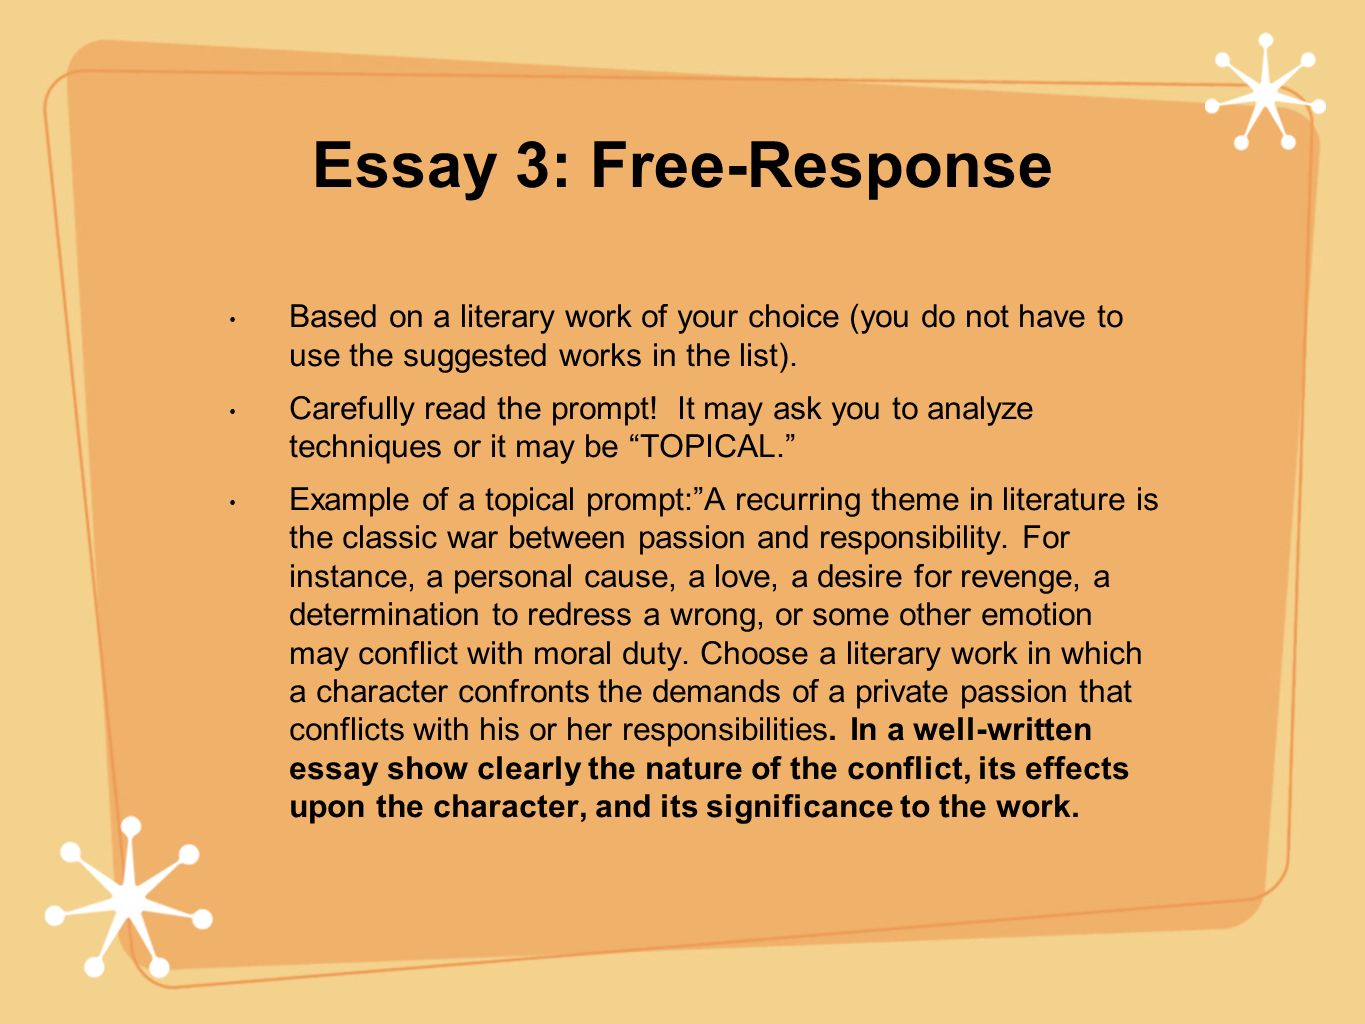 How to write an essay response to a prompt